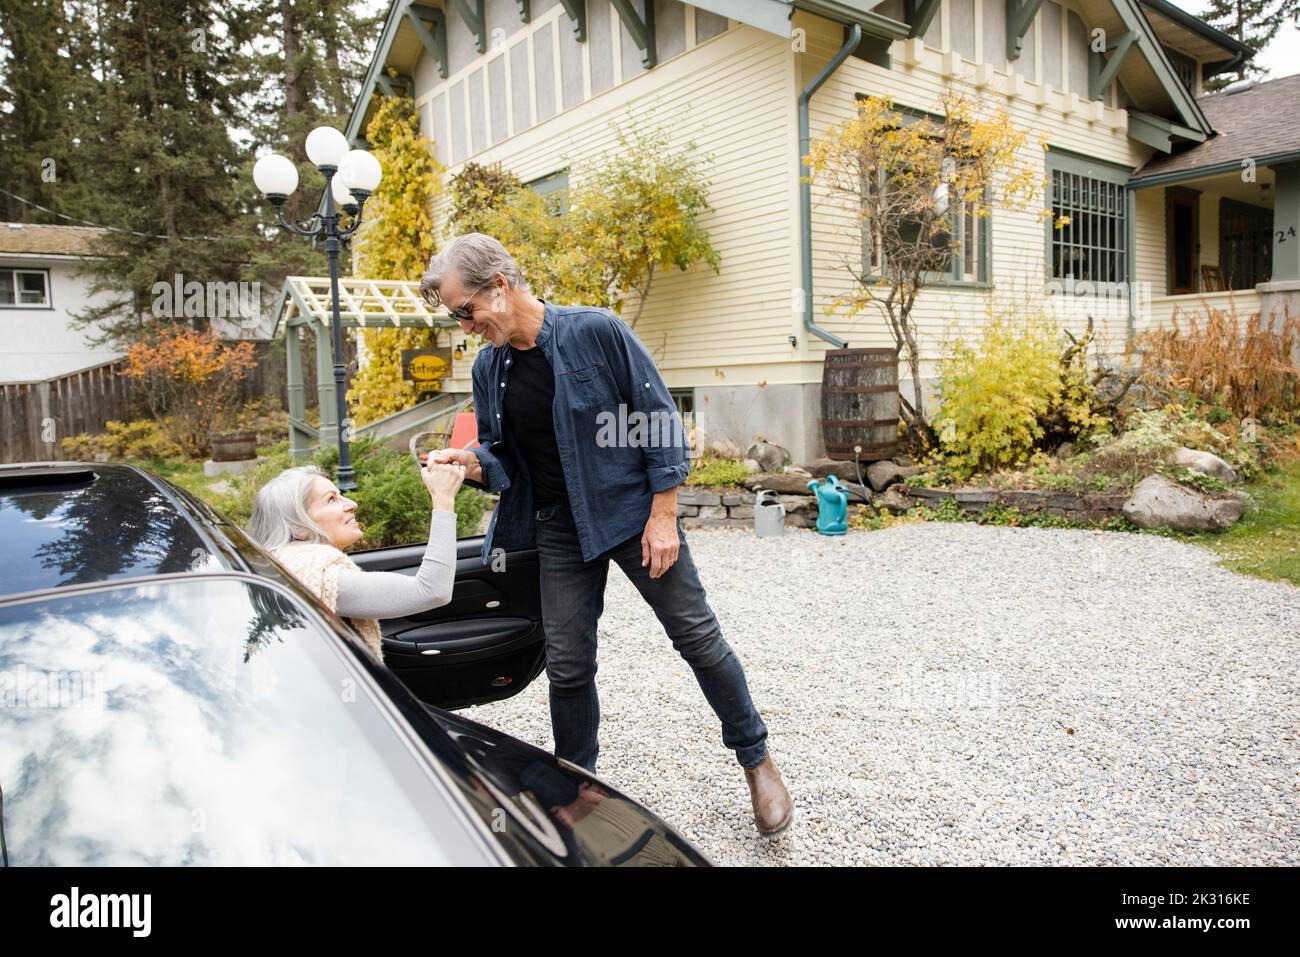 Man helping wife out of car Stock Photo